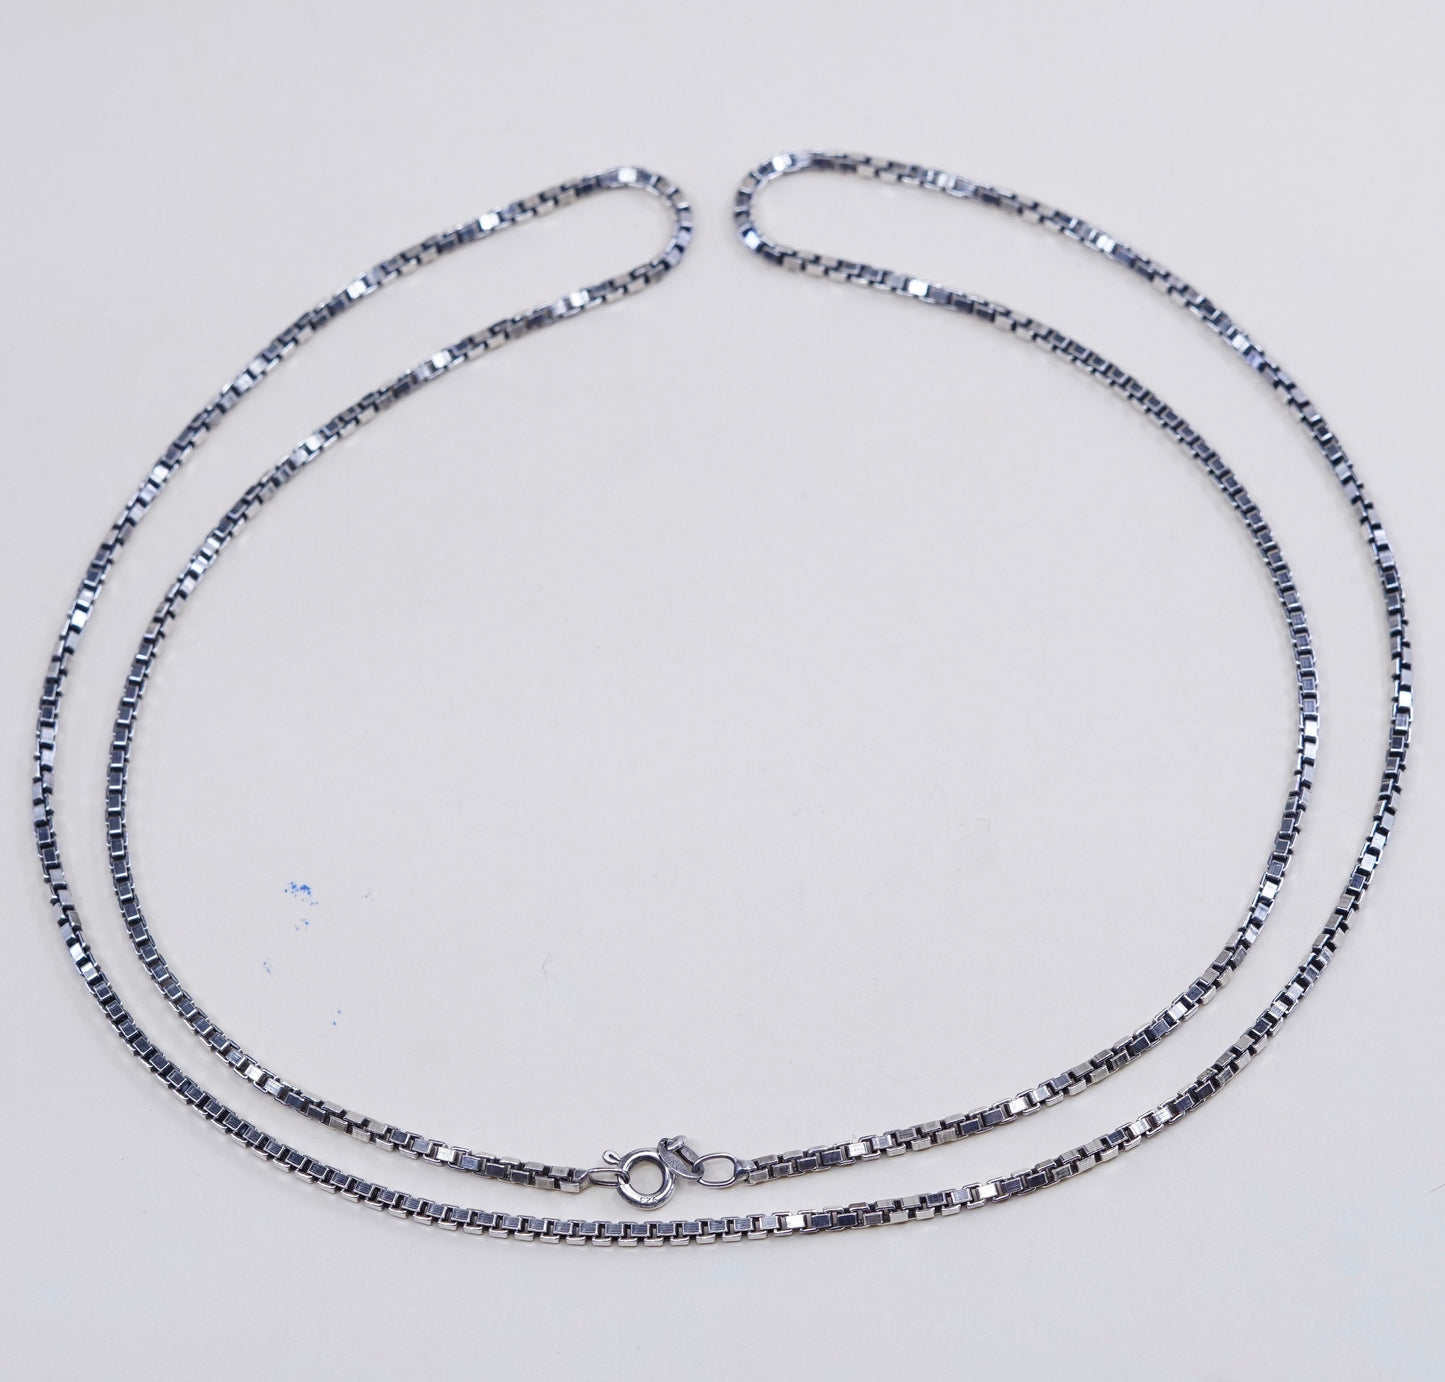 30”, 2mm, Vintage Italy sterling silver Italy 925 silver box chain, necklace